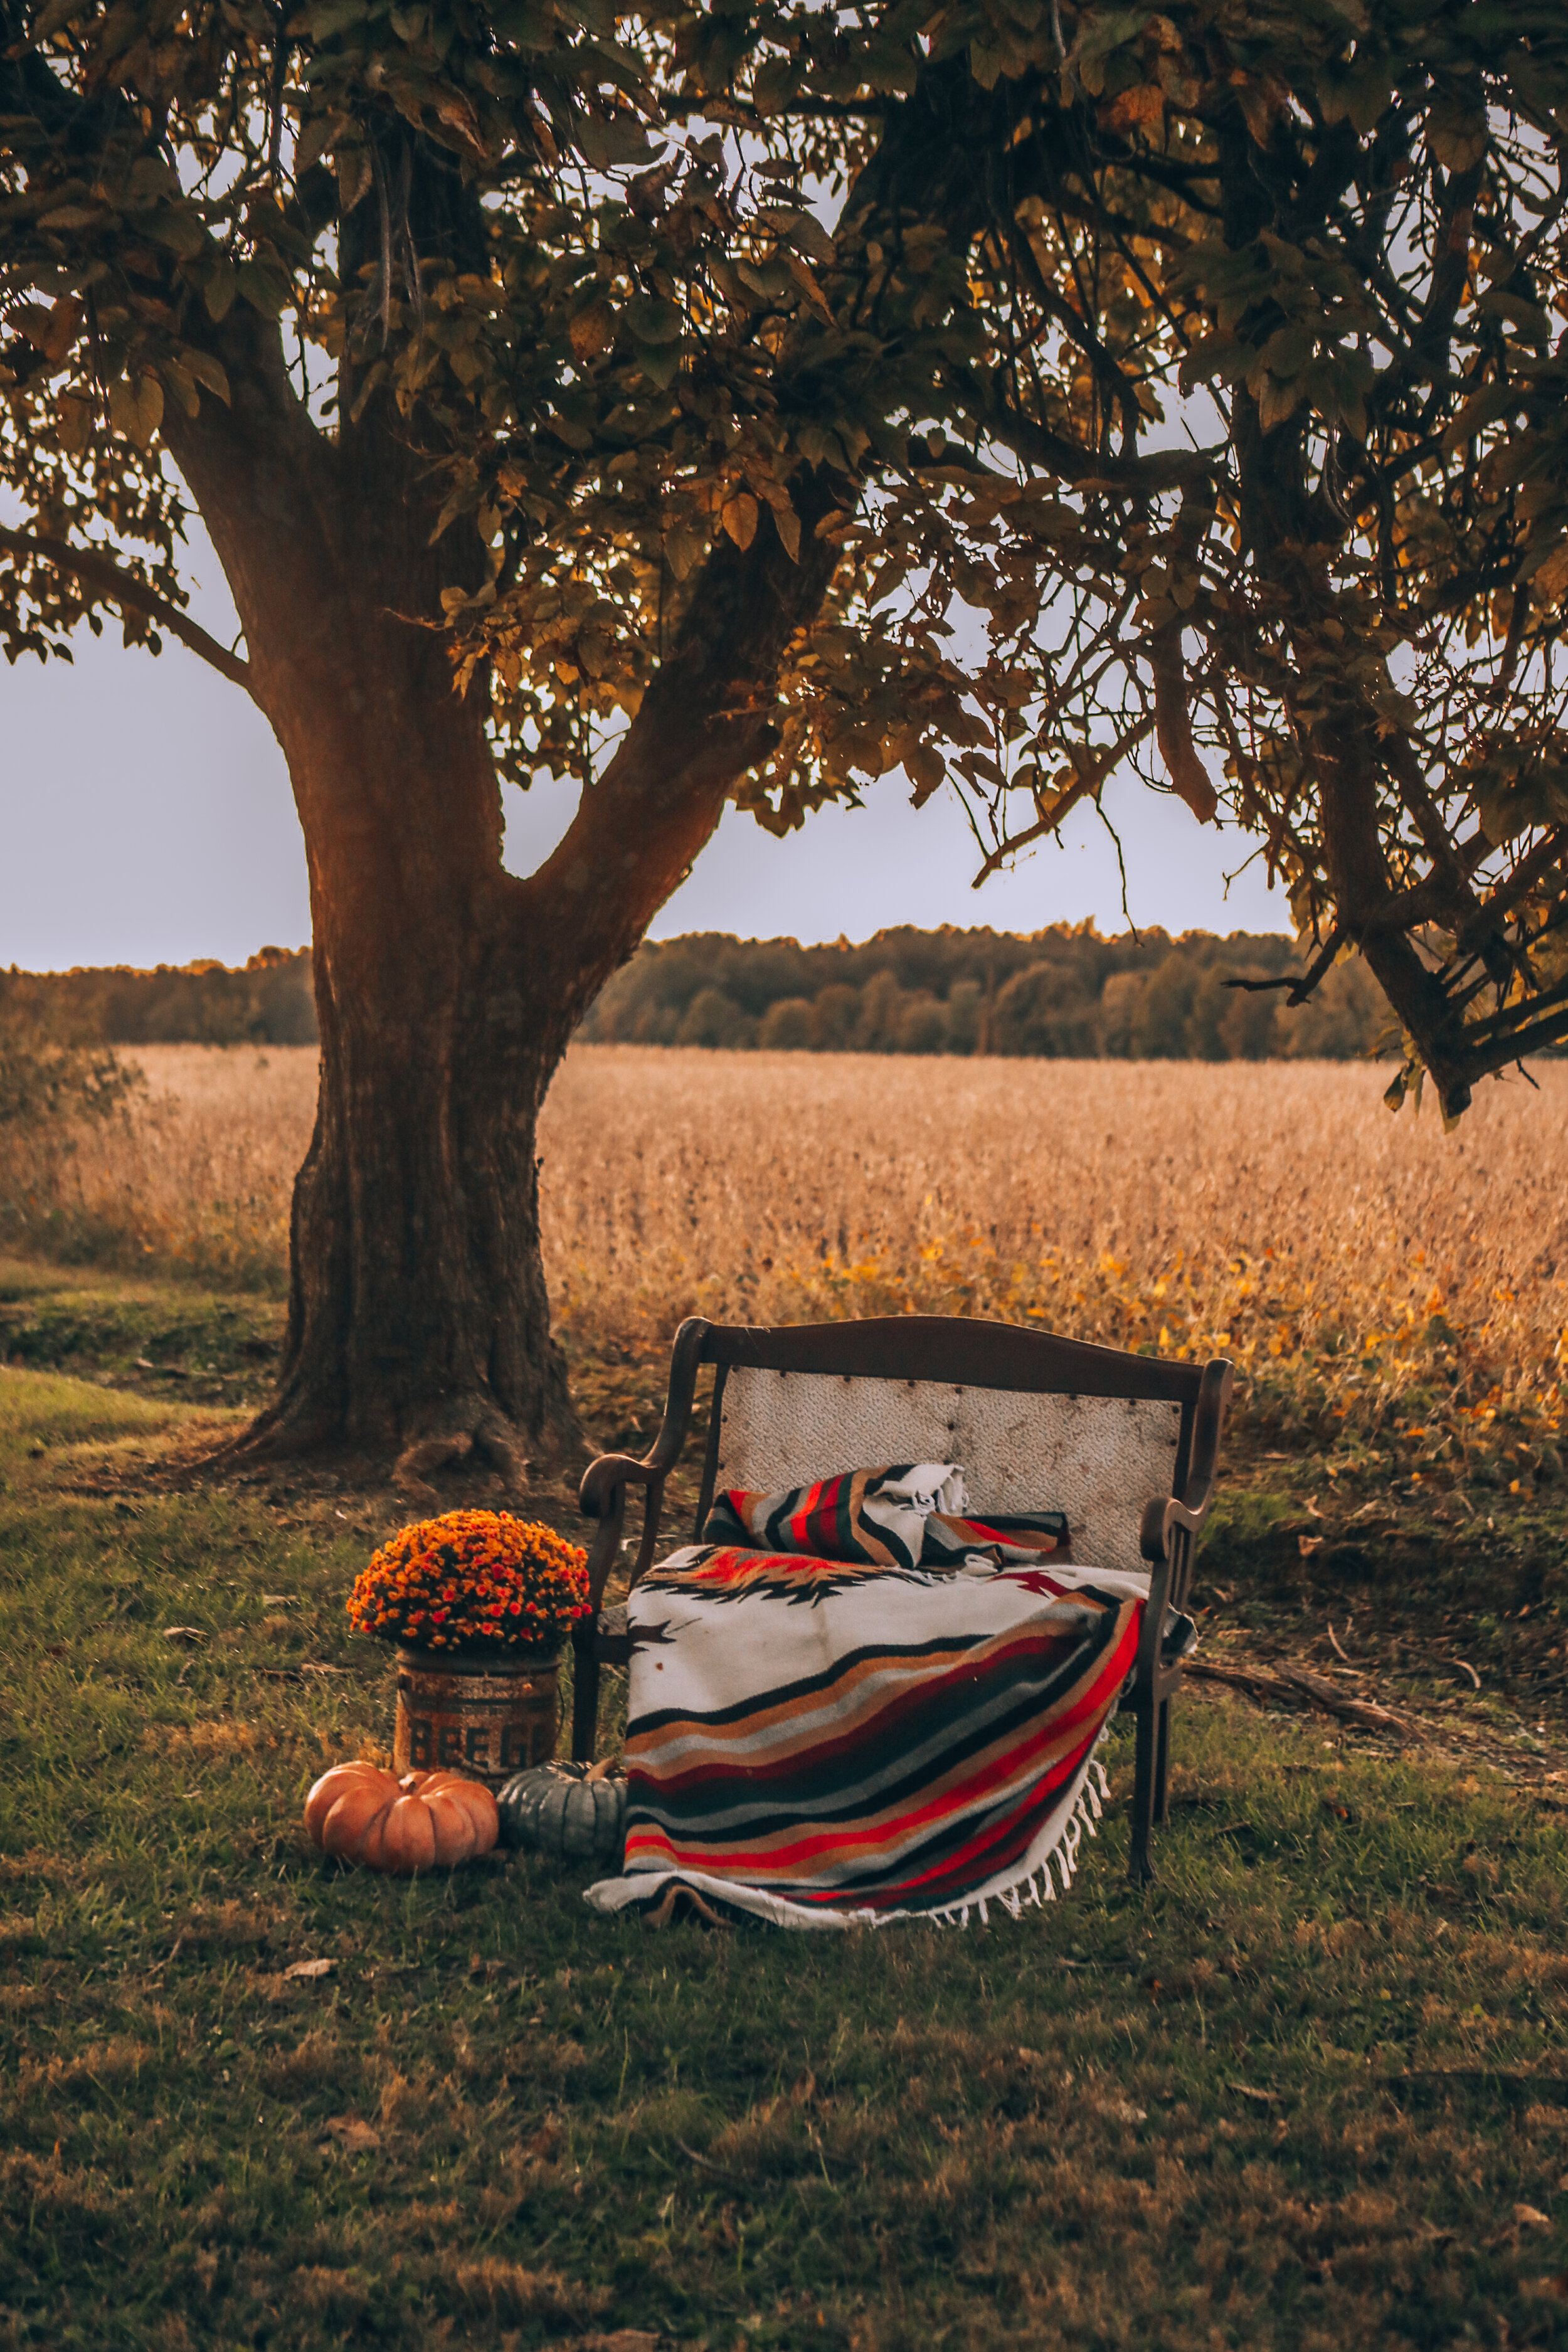  This was our “photo booth” for the event. The settee  is for sale! The blanket is by Tribe and True. The old can I found in the barn twenty years ago and used to use for pumpkin displays.  